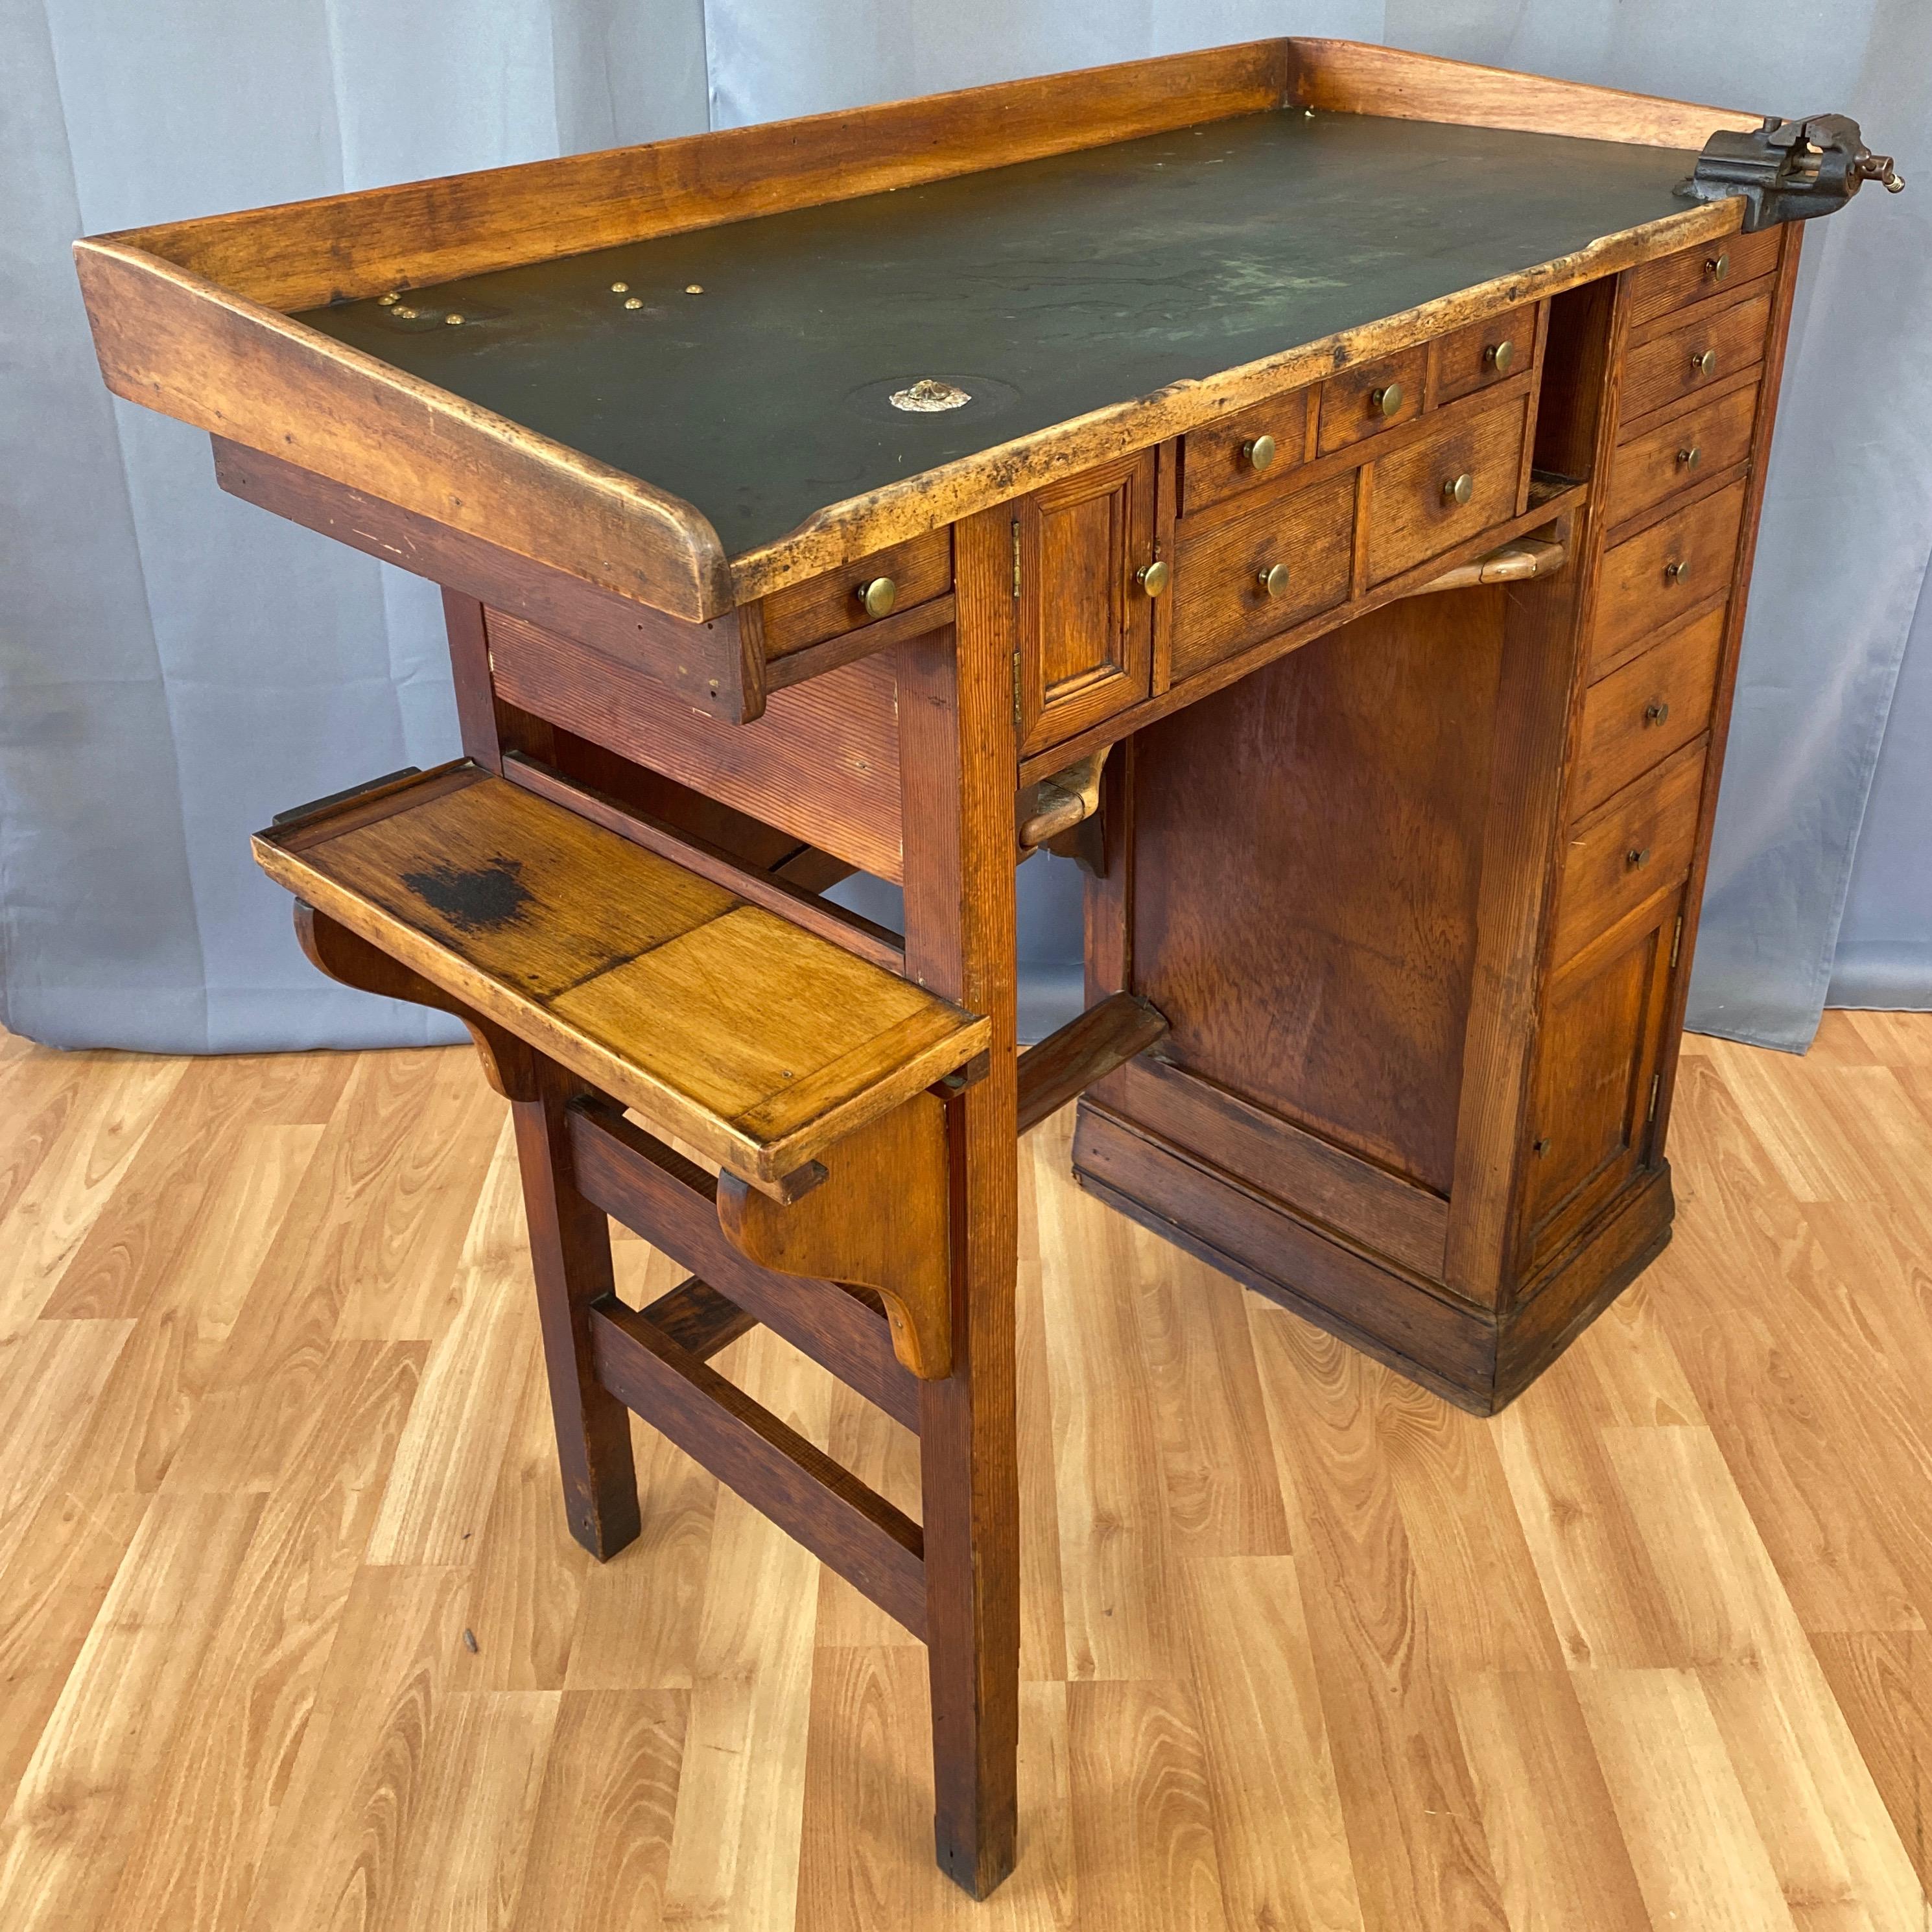 American Craftsman Antique Watchmaker’s or Jeweler’s Workbench or Tall Desk, 1920s